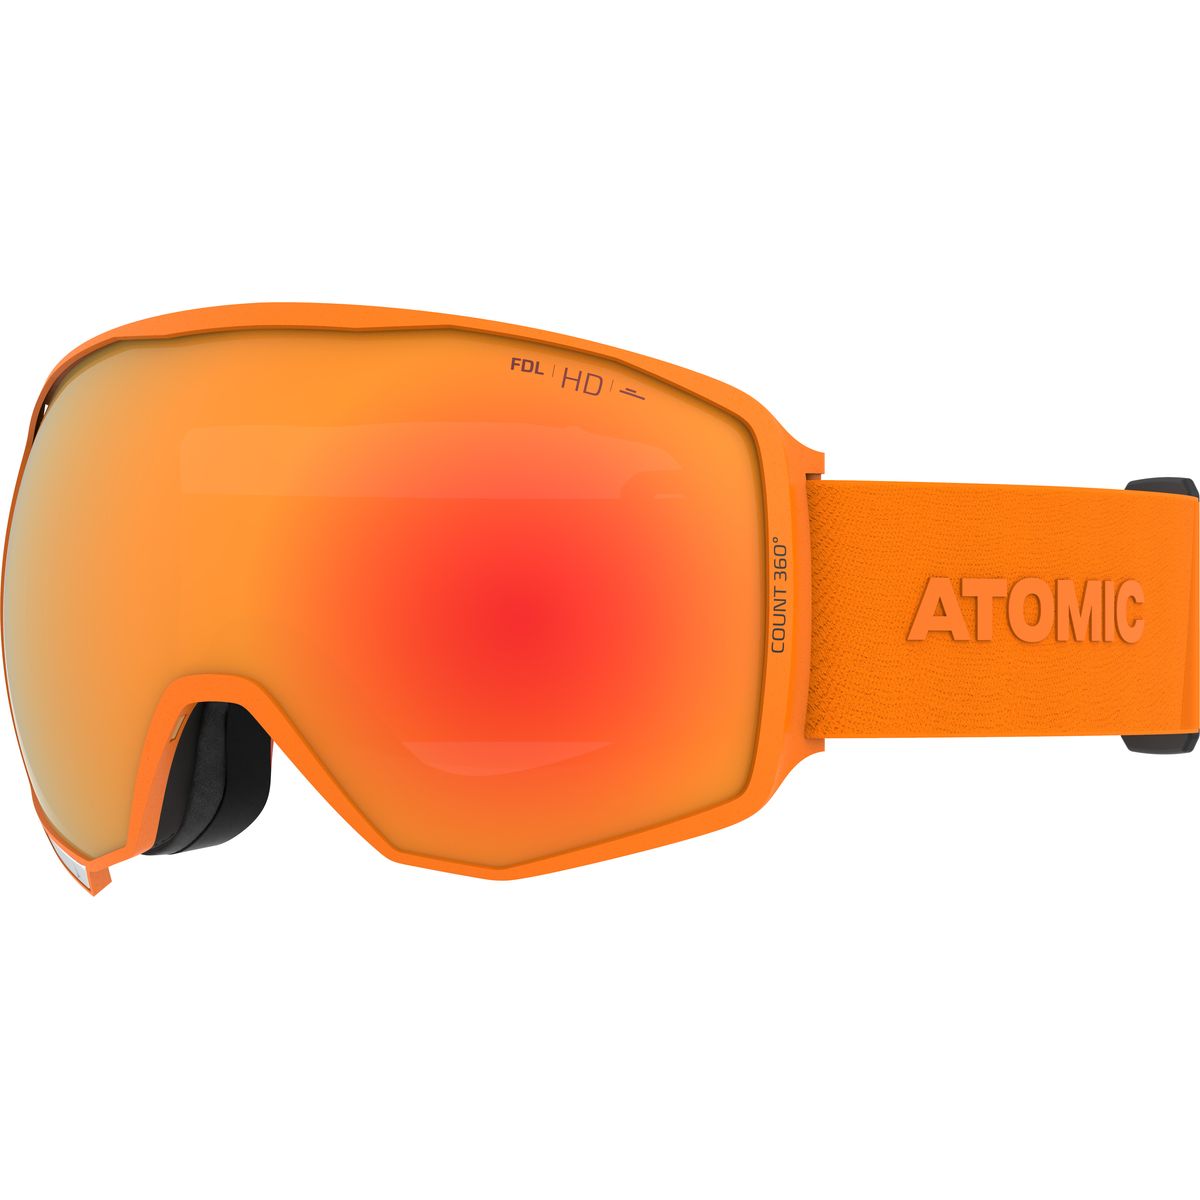 Atomic Count 360° HD Skibrille